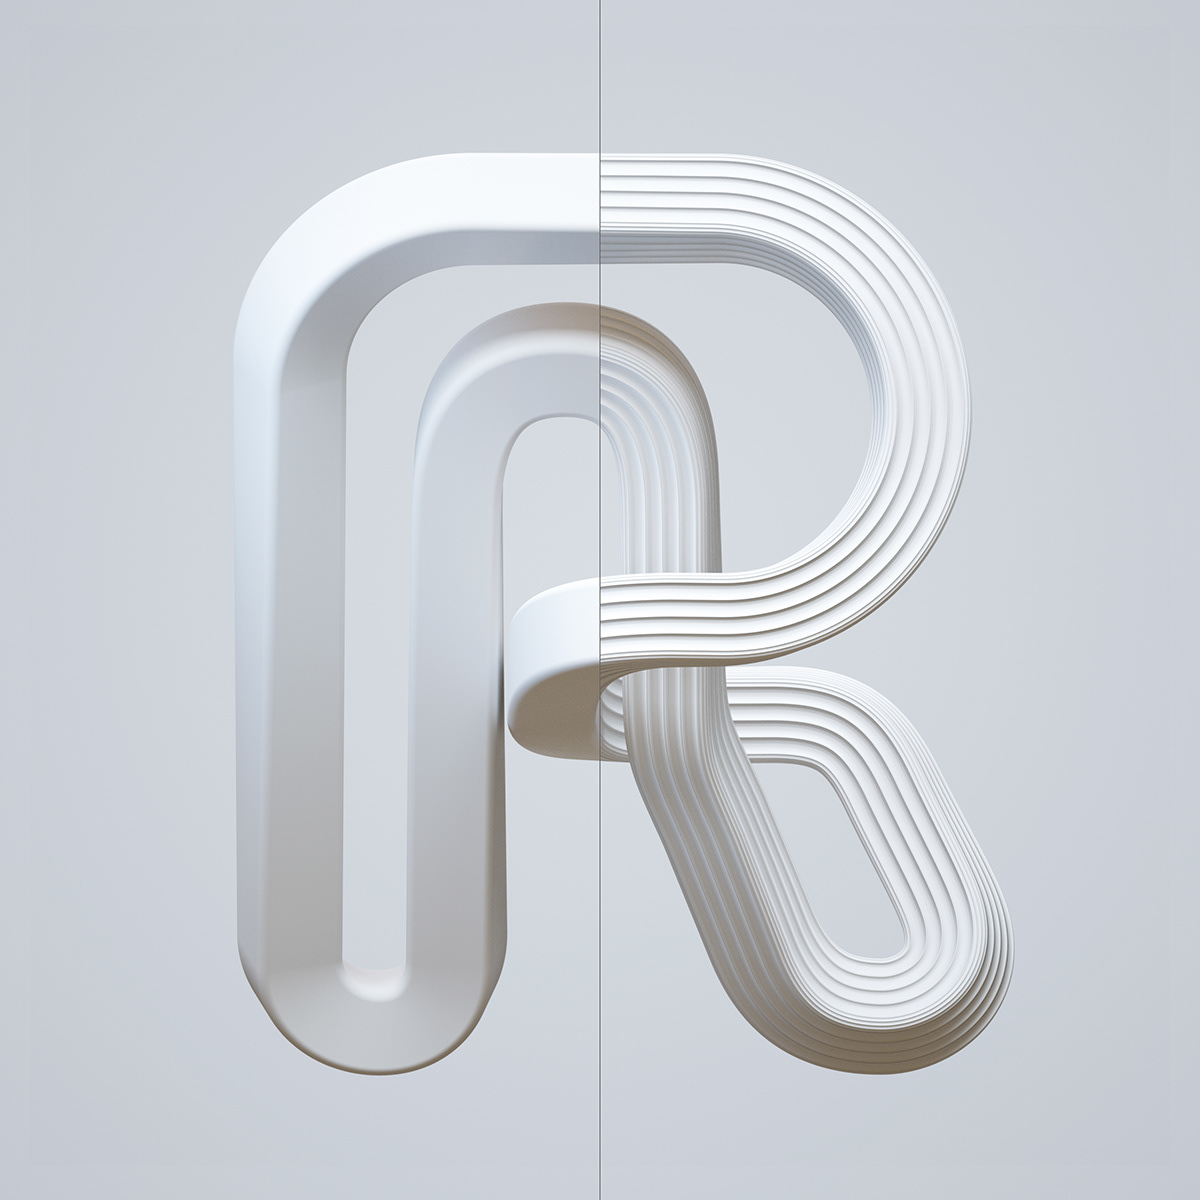 36days 36daysoftype 3D 3DType alphabets letters numbers octane singapore ufho